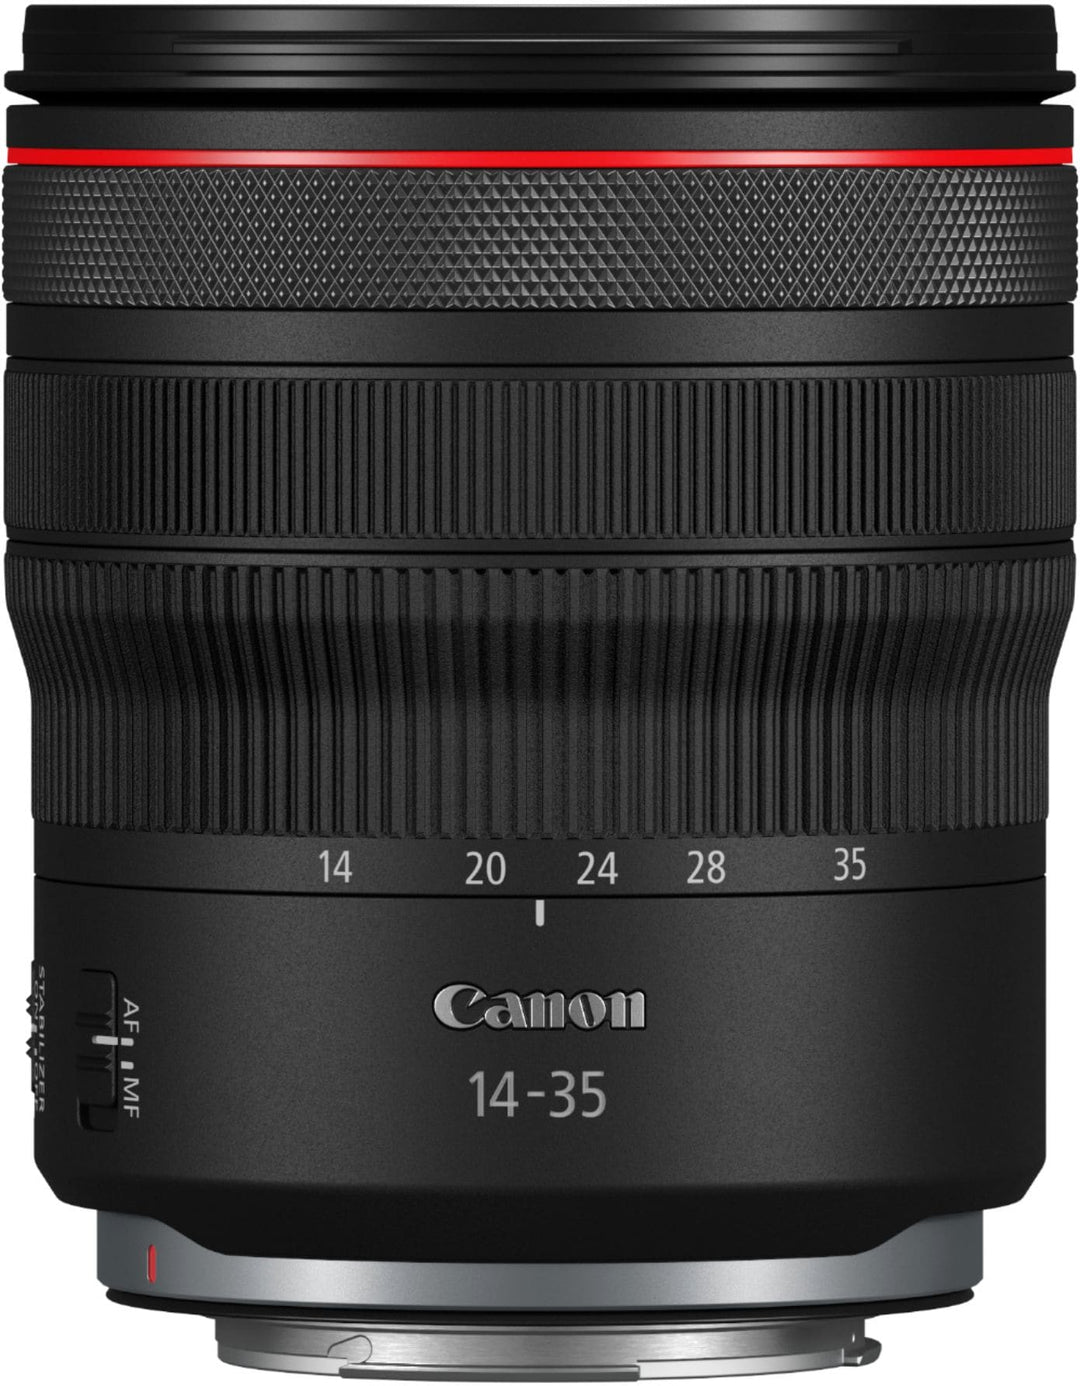 RF 14-35mm f/4L IS USM Ultra-Wide-Angle Zoom Lens for RF Mount Canon Cameras - Black_3